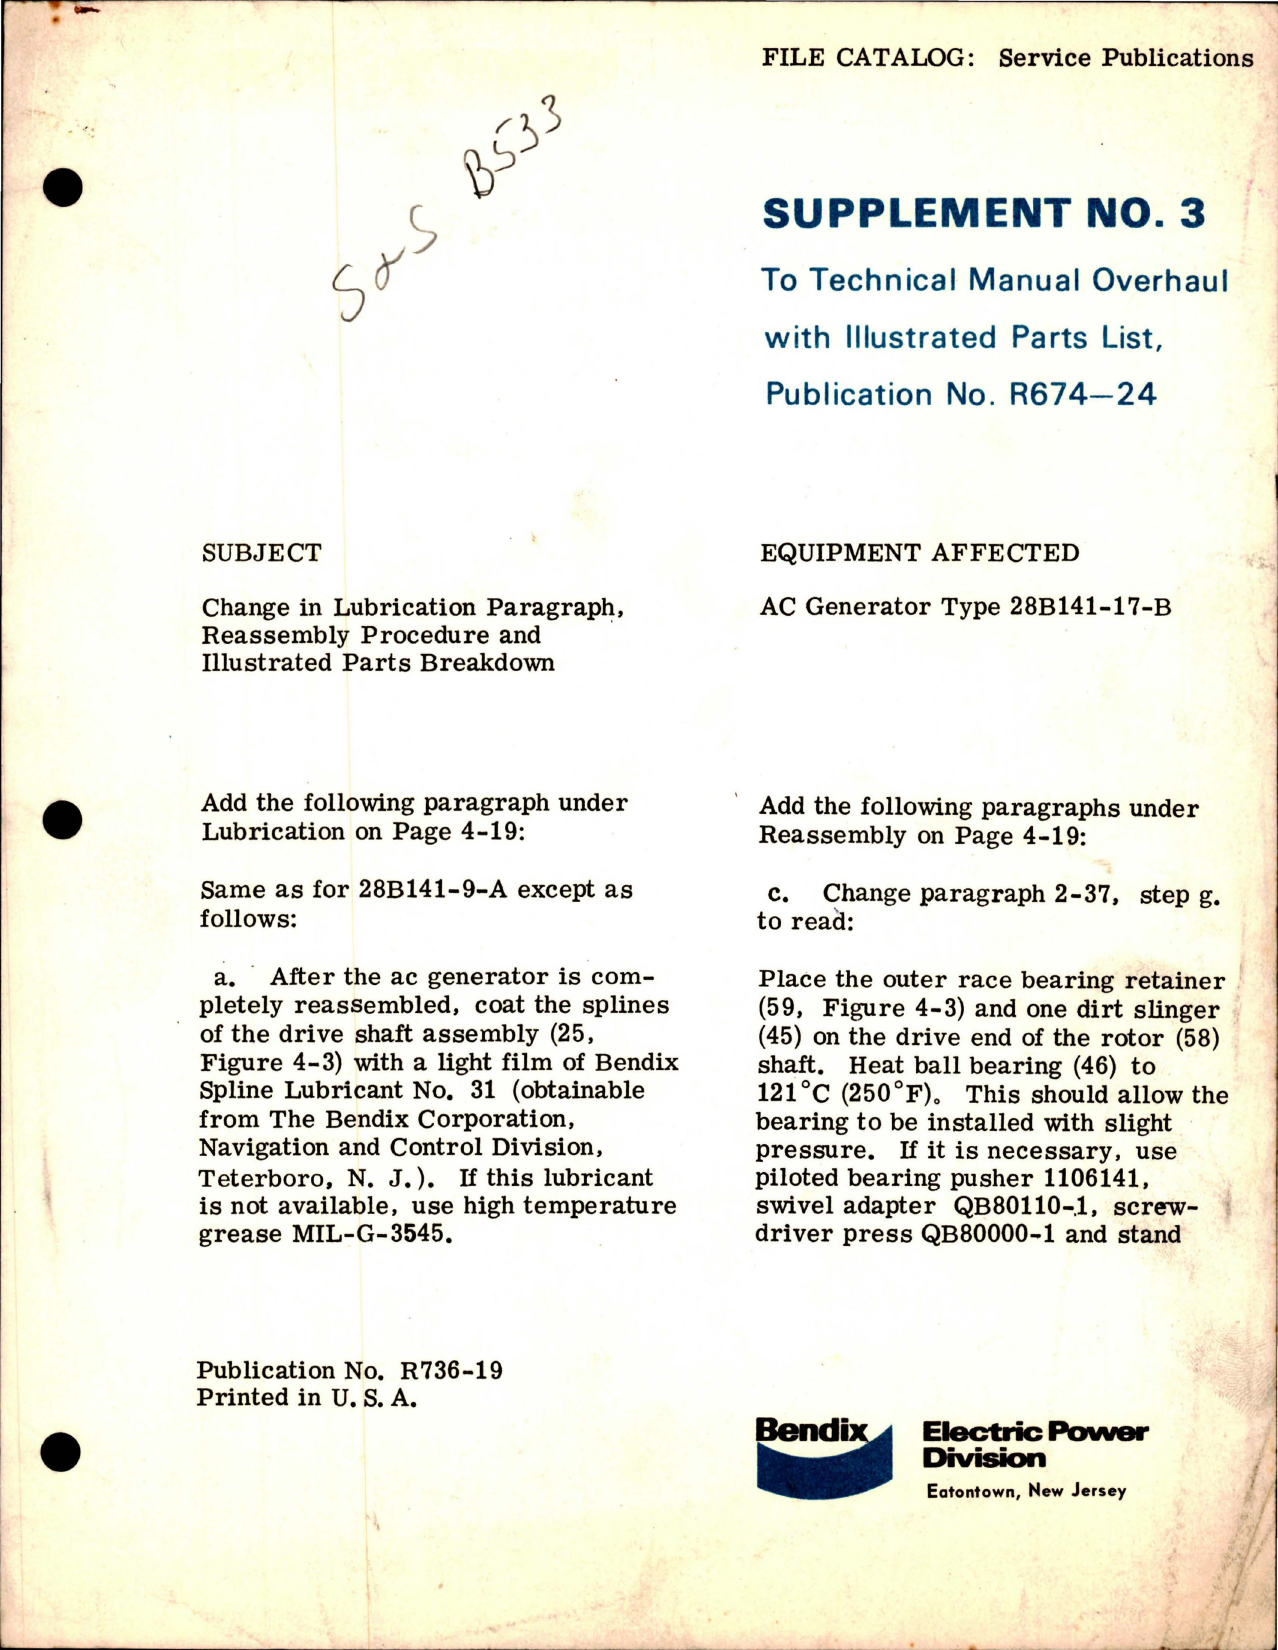 Sample page 1 from AirCorps Library document: Supplement No. 3 to Overhaul Manual w Parts List - Publication R674-24 - AC Generator Type 28B141-17-B